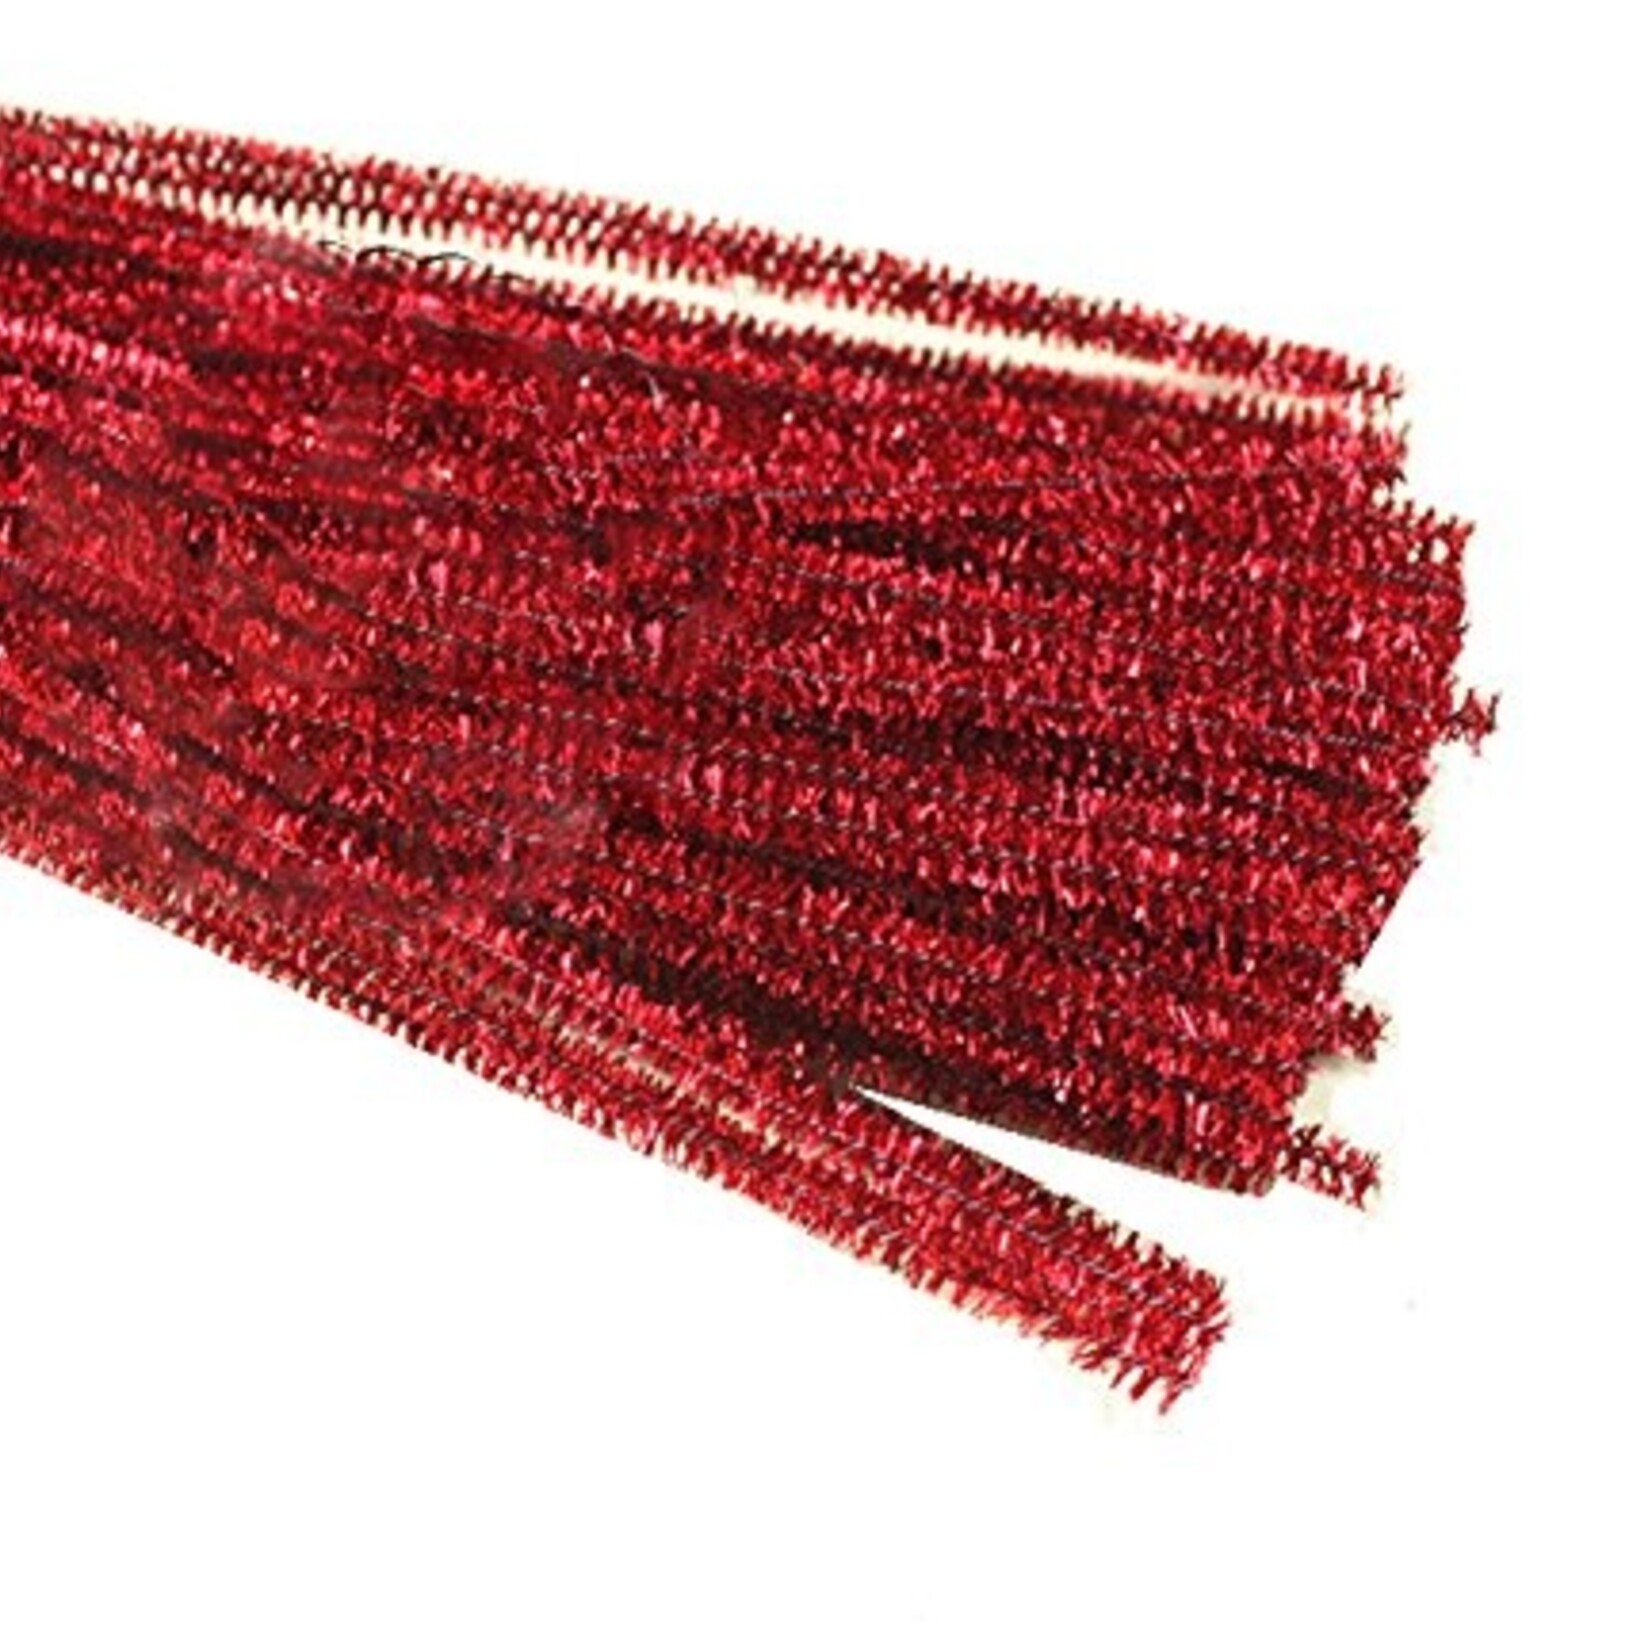 Metallic Chenille Stems (Pipe Cleaners) Each Assorted Colors